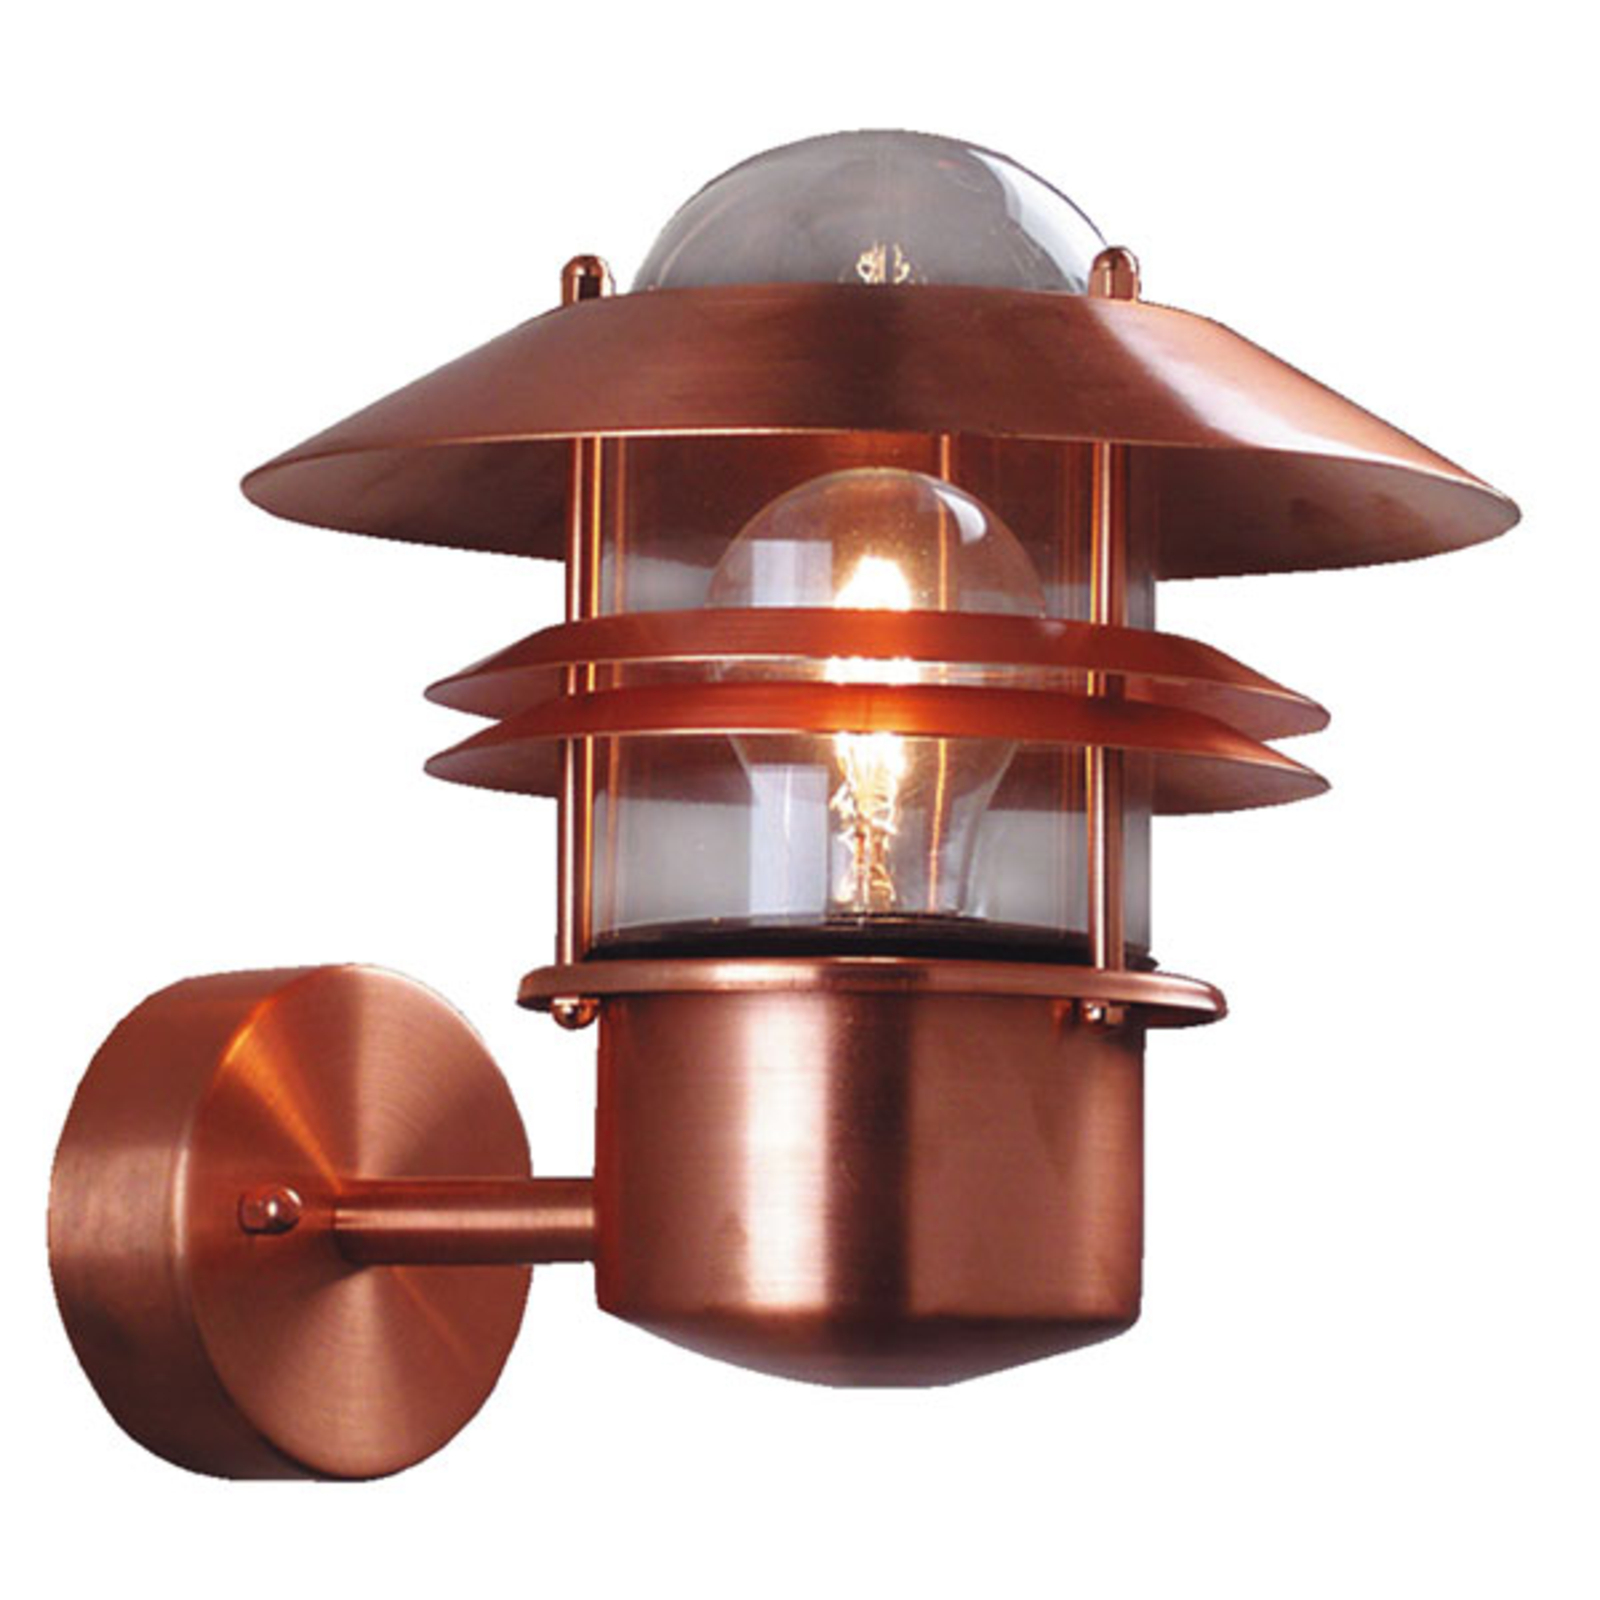 Blokhus outdoor wall lamp in copper